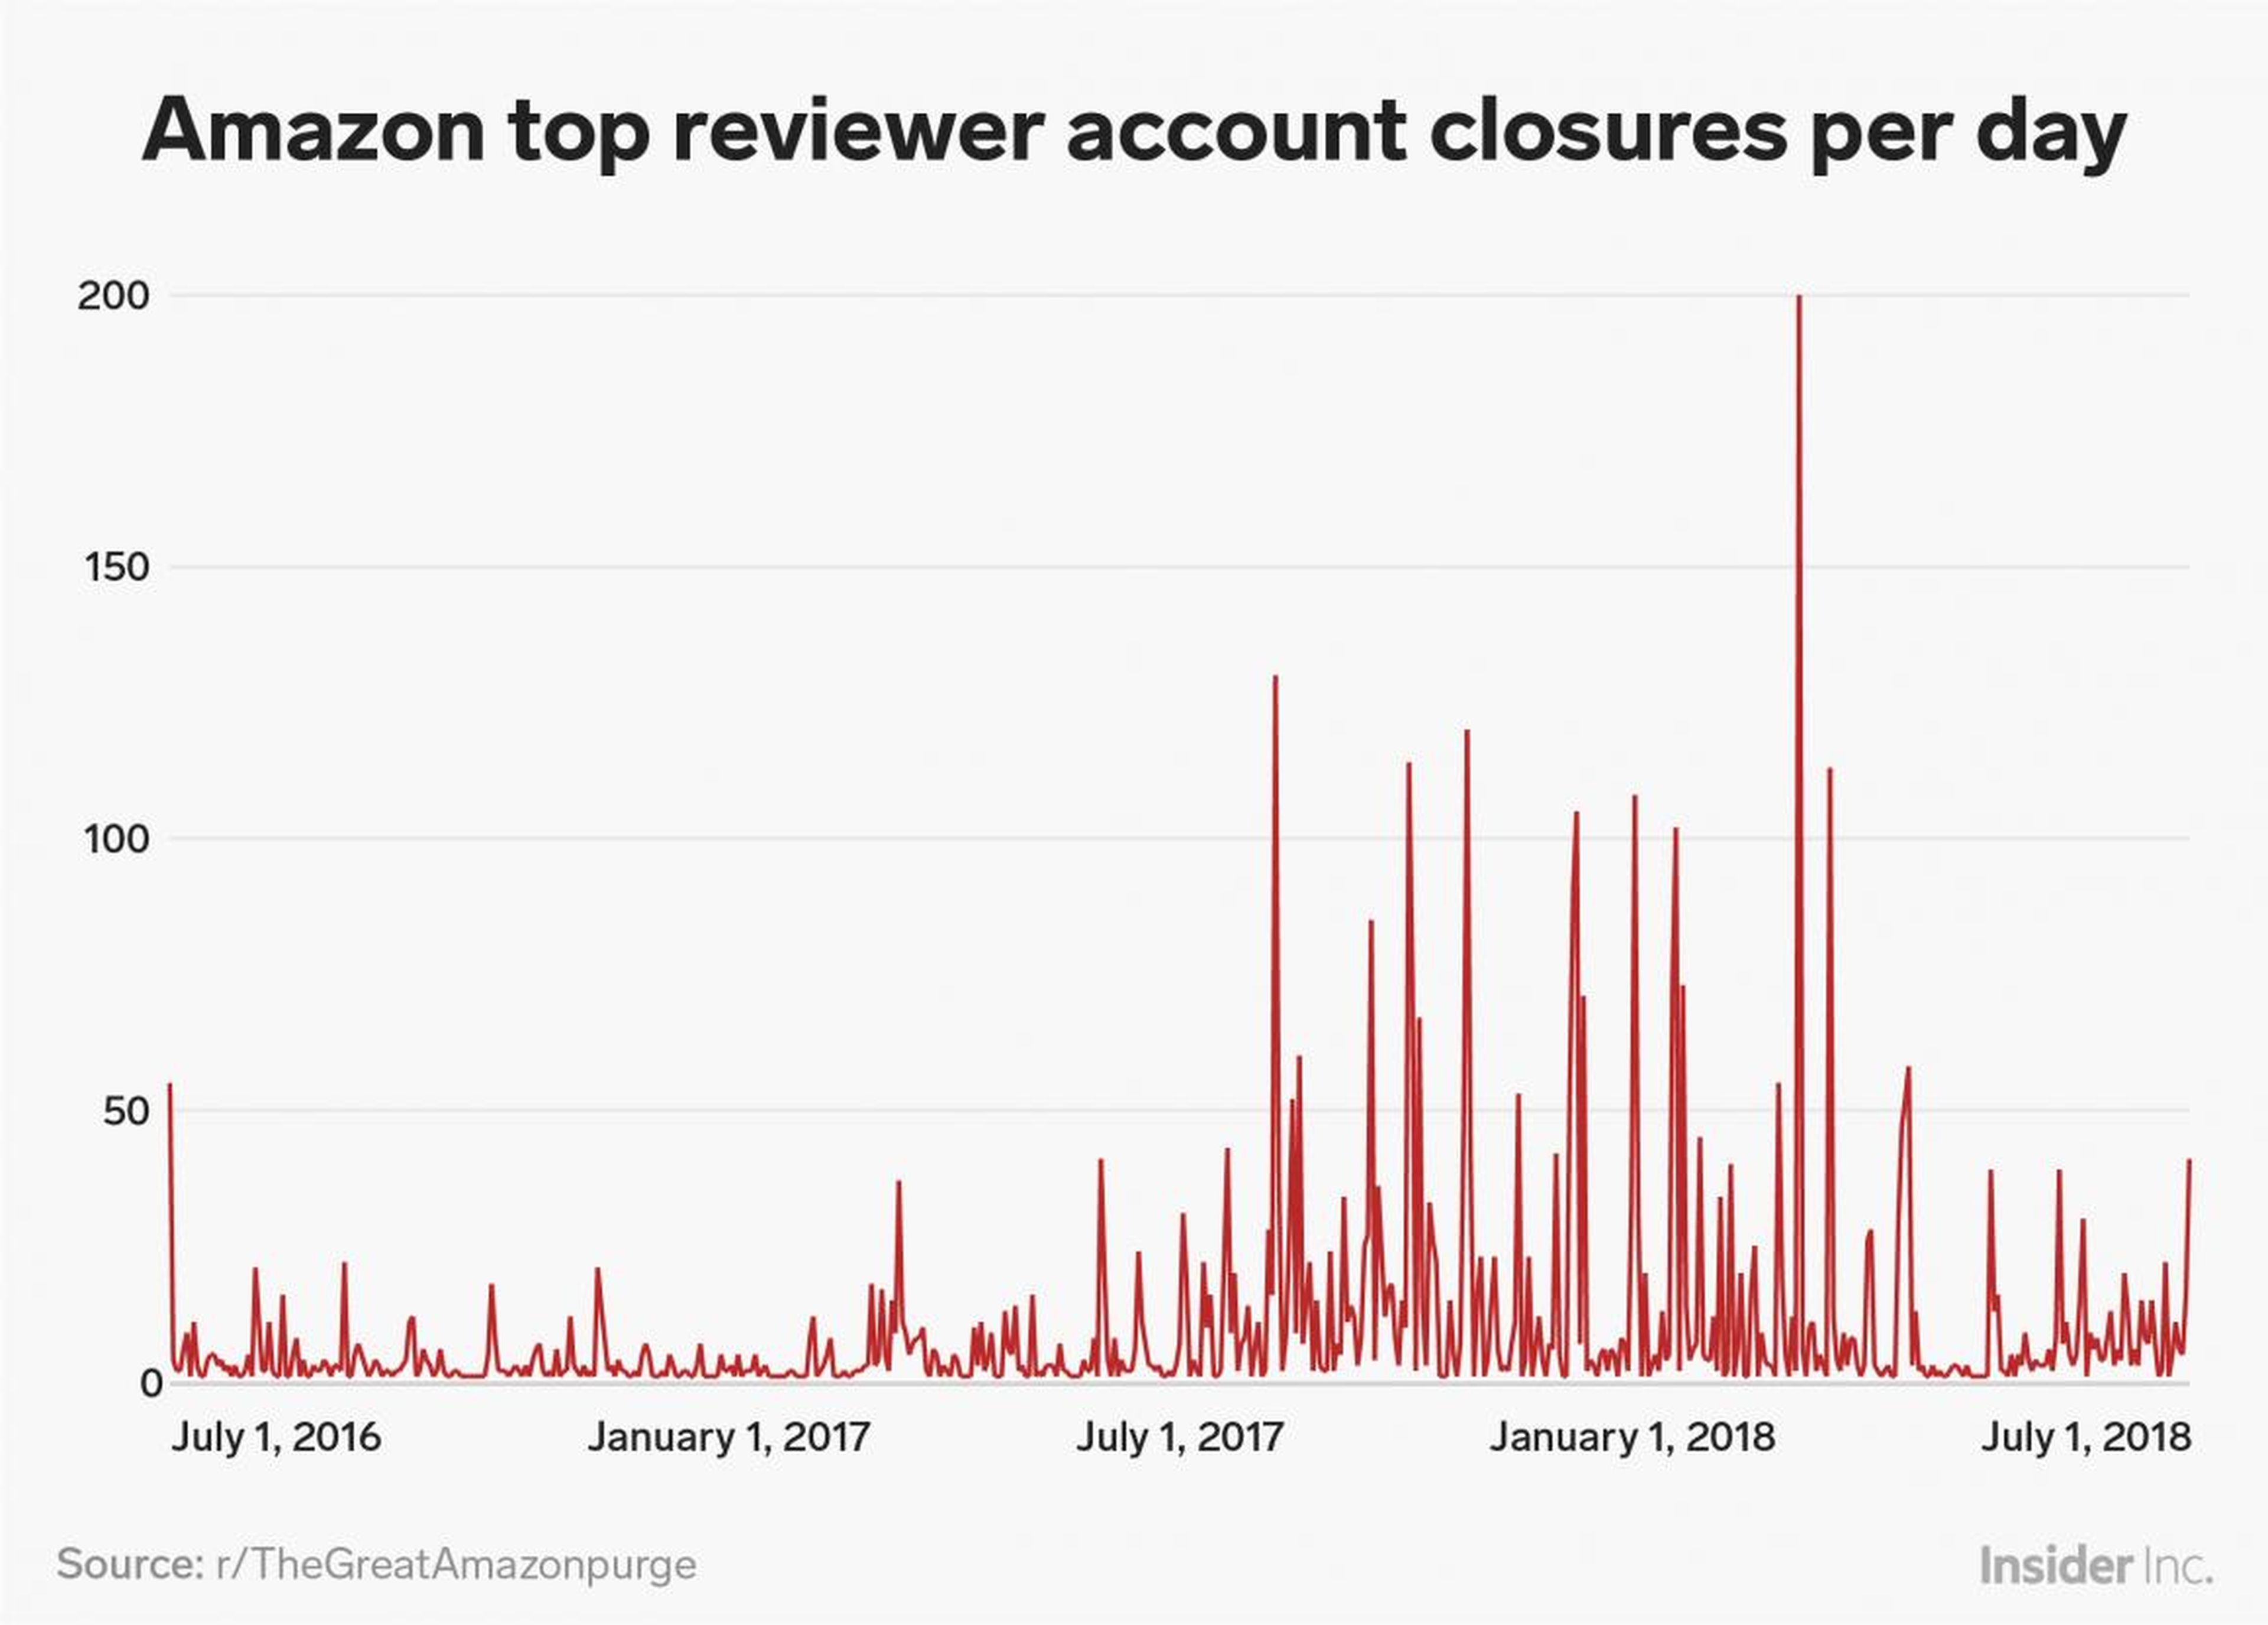 Data reveals Amazon has banned more than 5,700 of its top reviewers in the last 2 years as it increasingly cracks down on review abuse